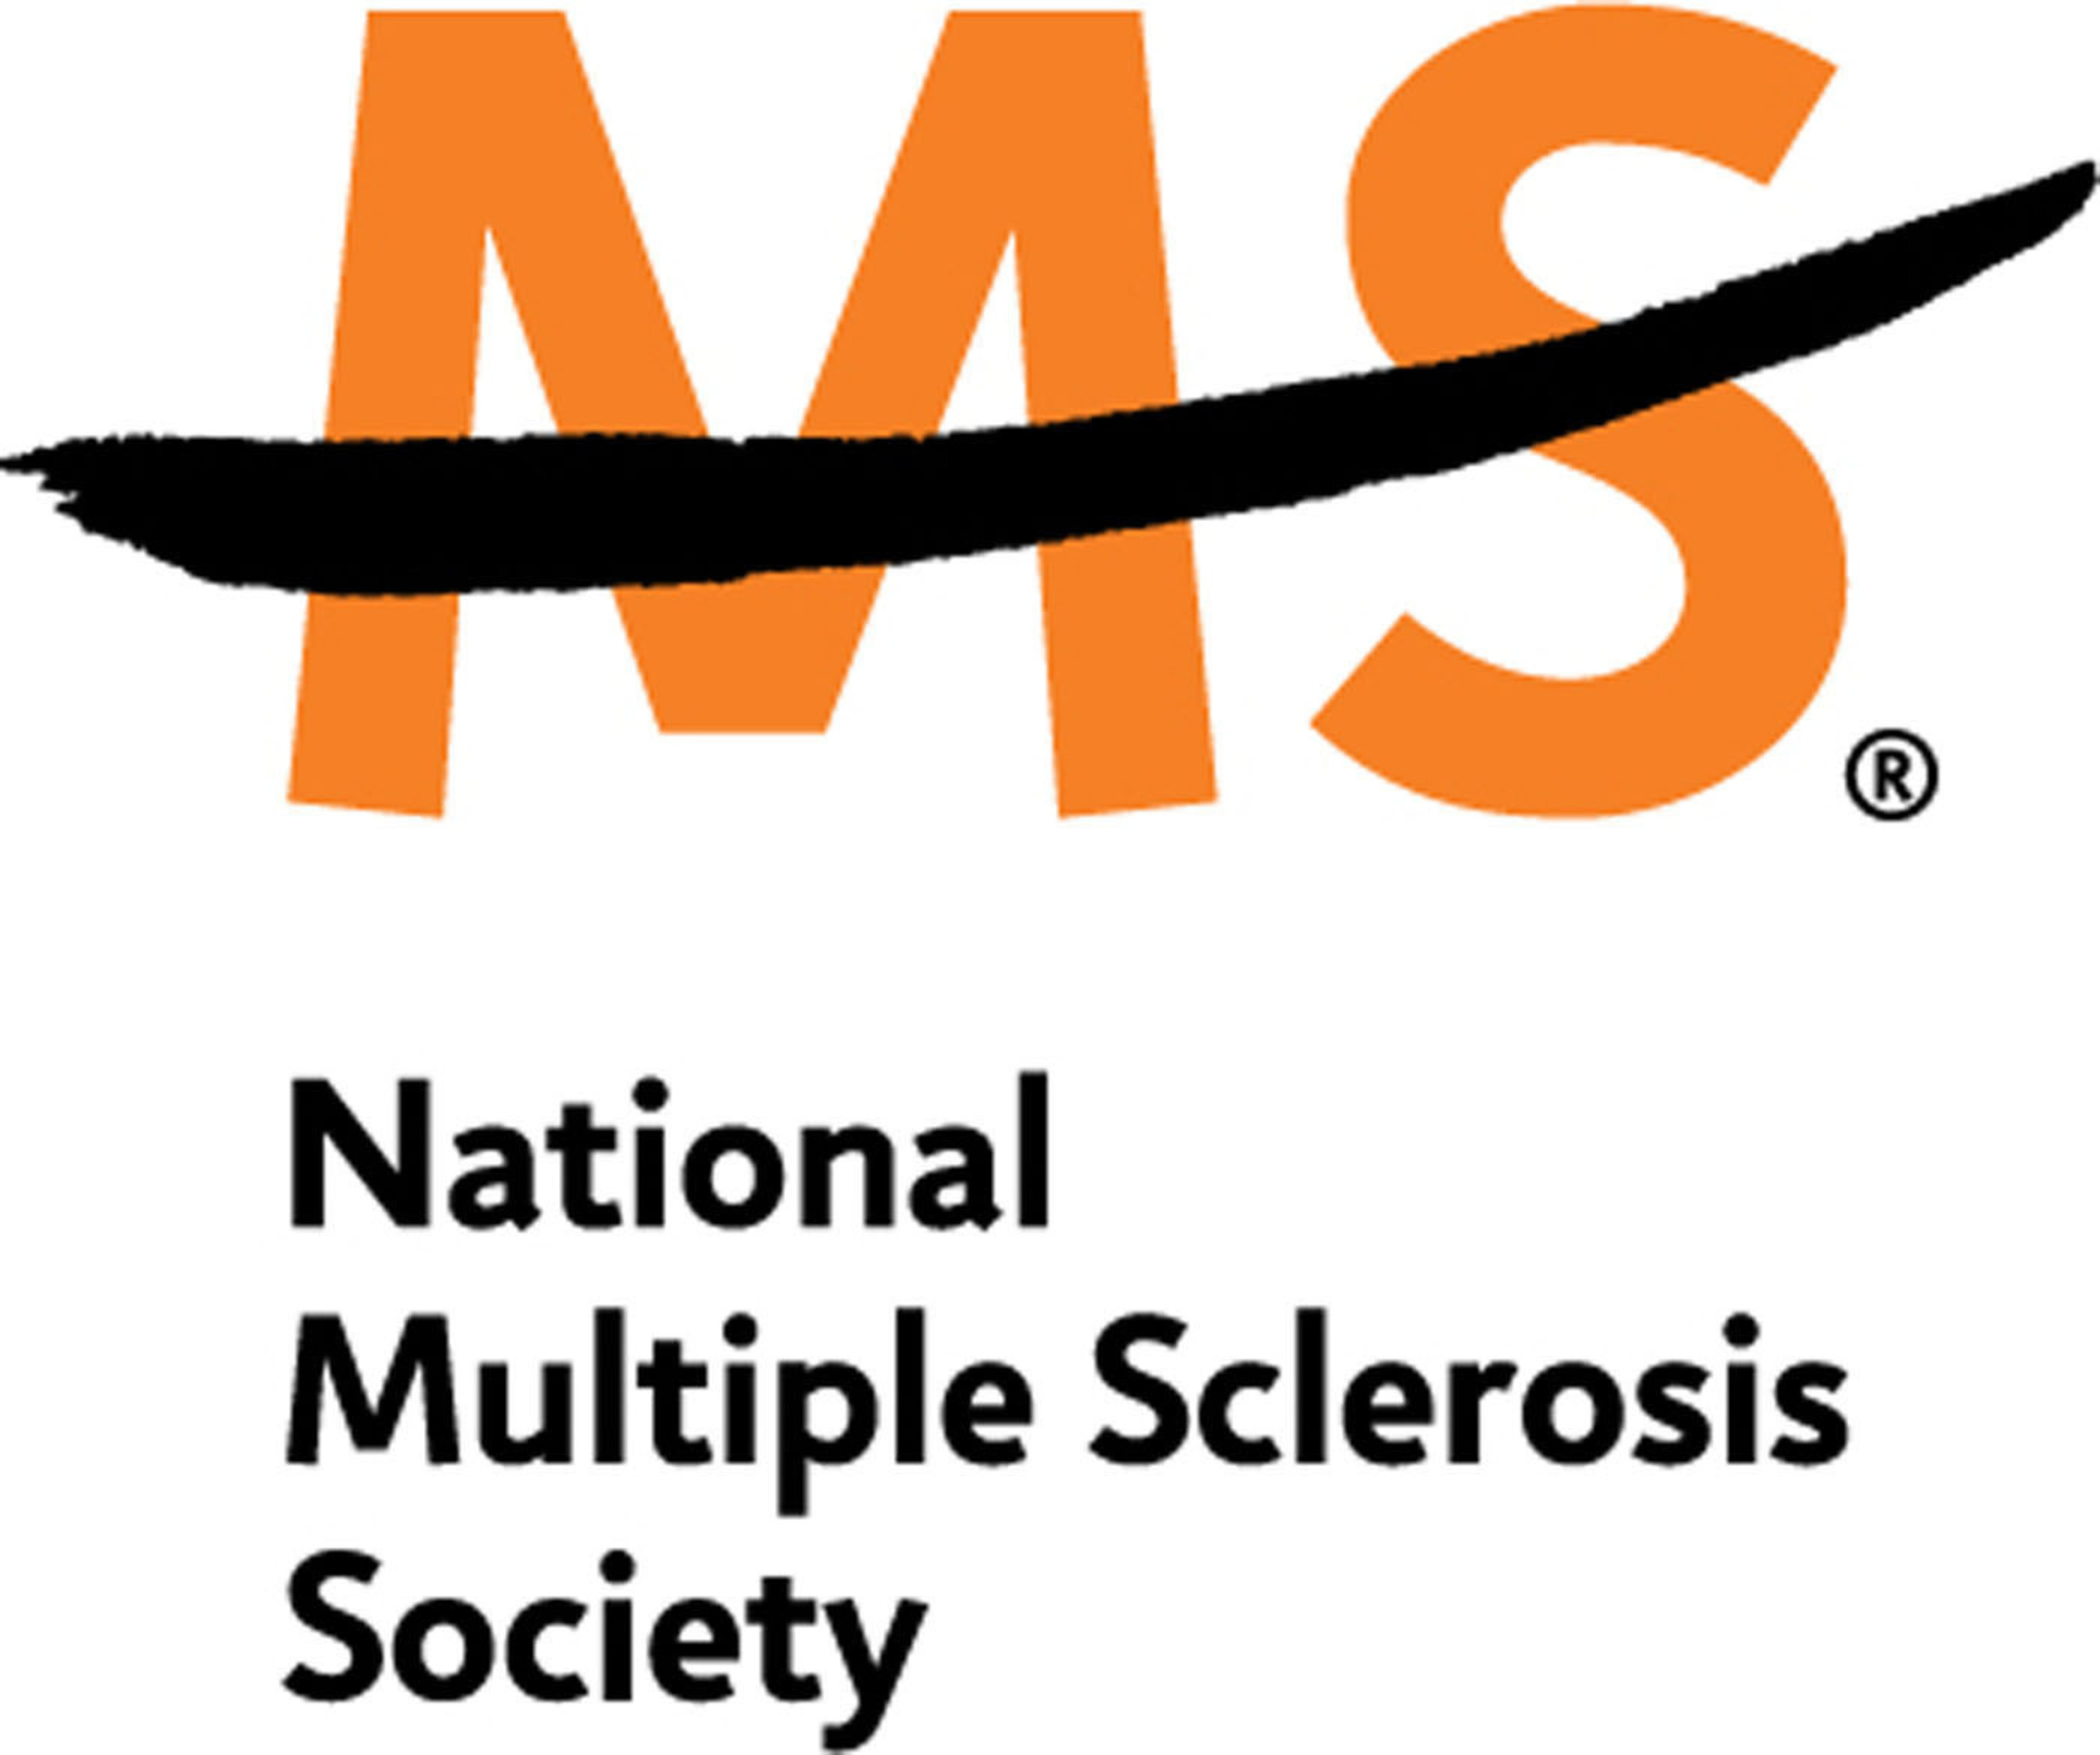 Every connection counts in the movement to end MS forever.